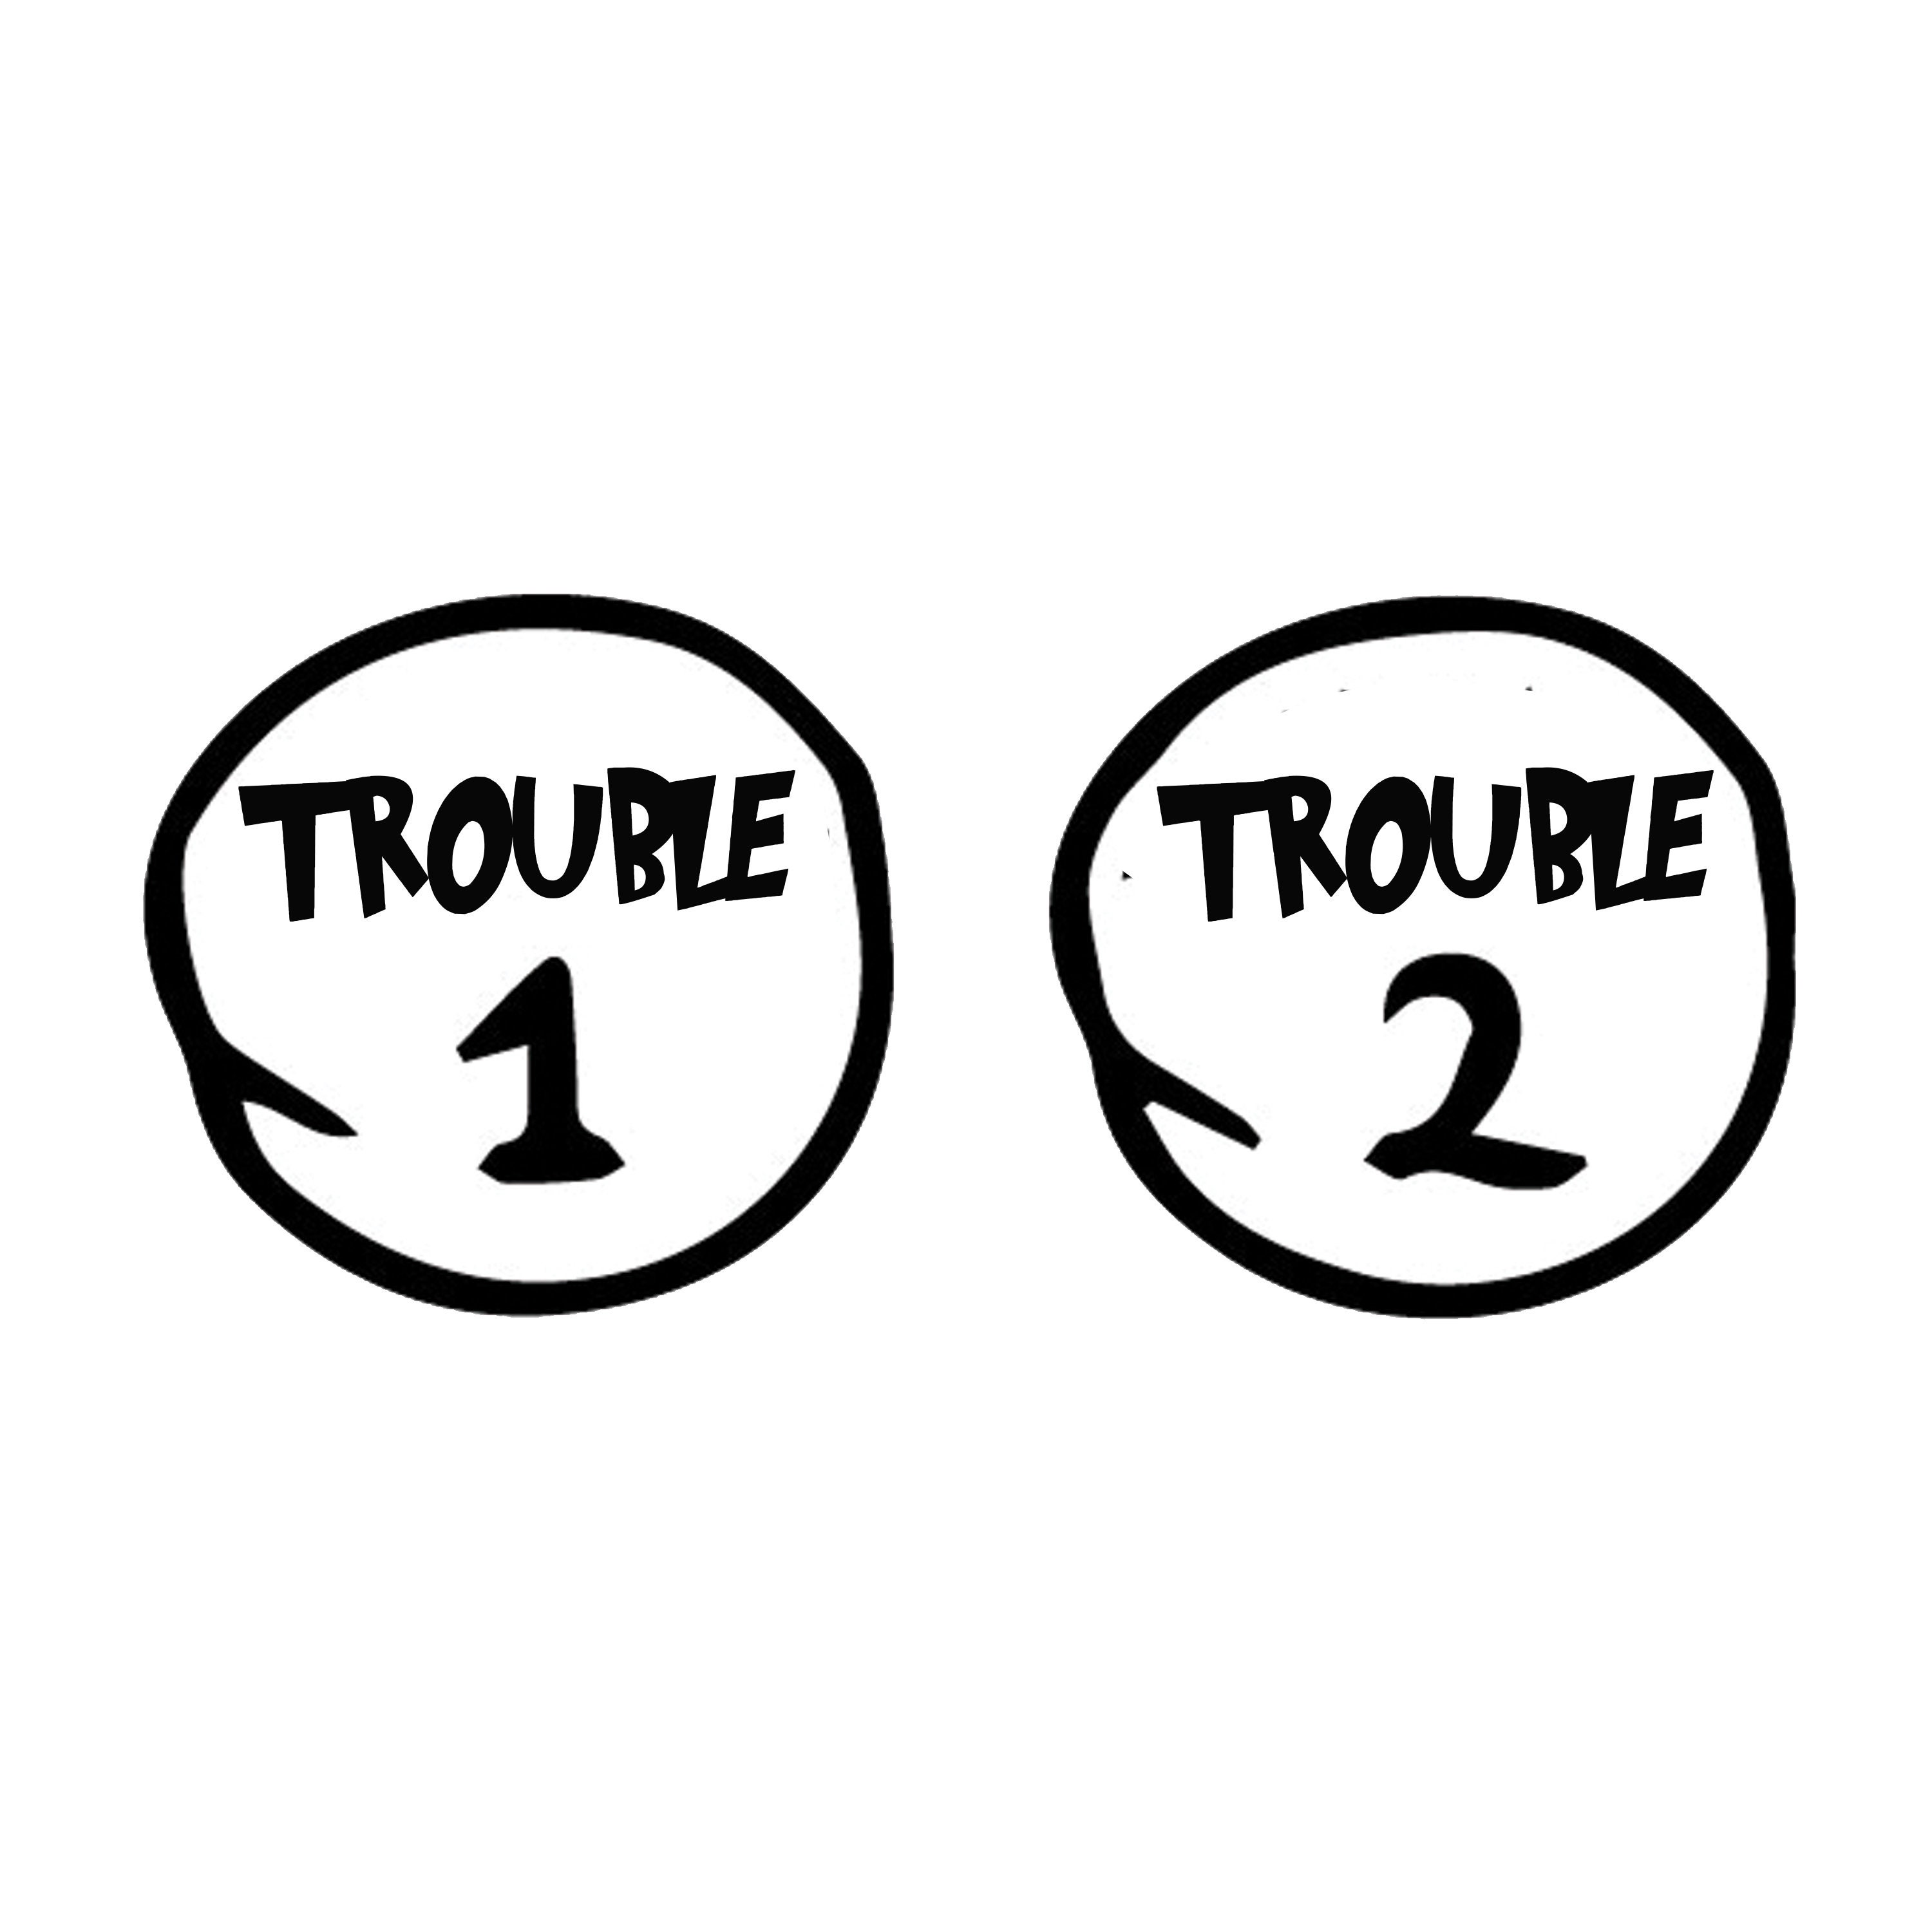 Trouble 1 and 2